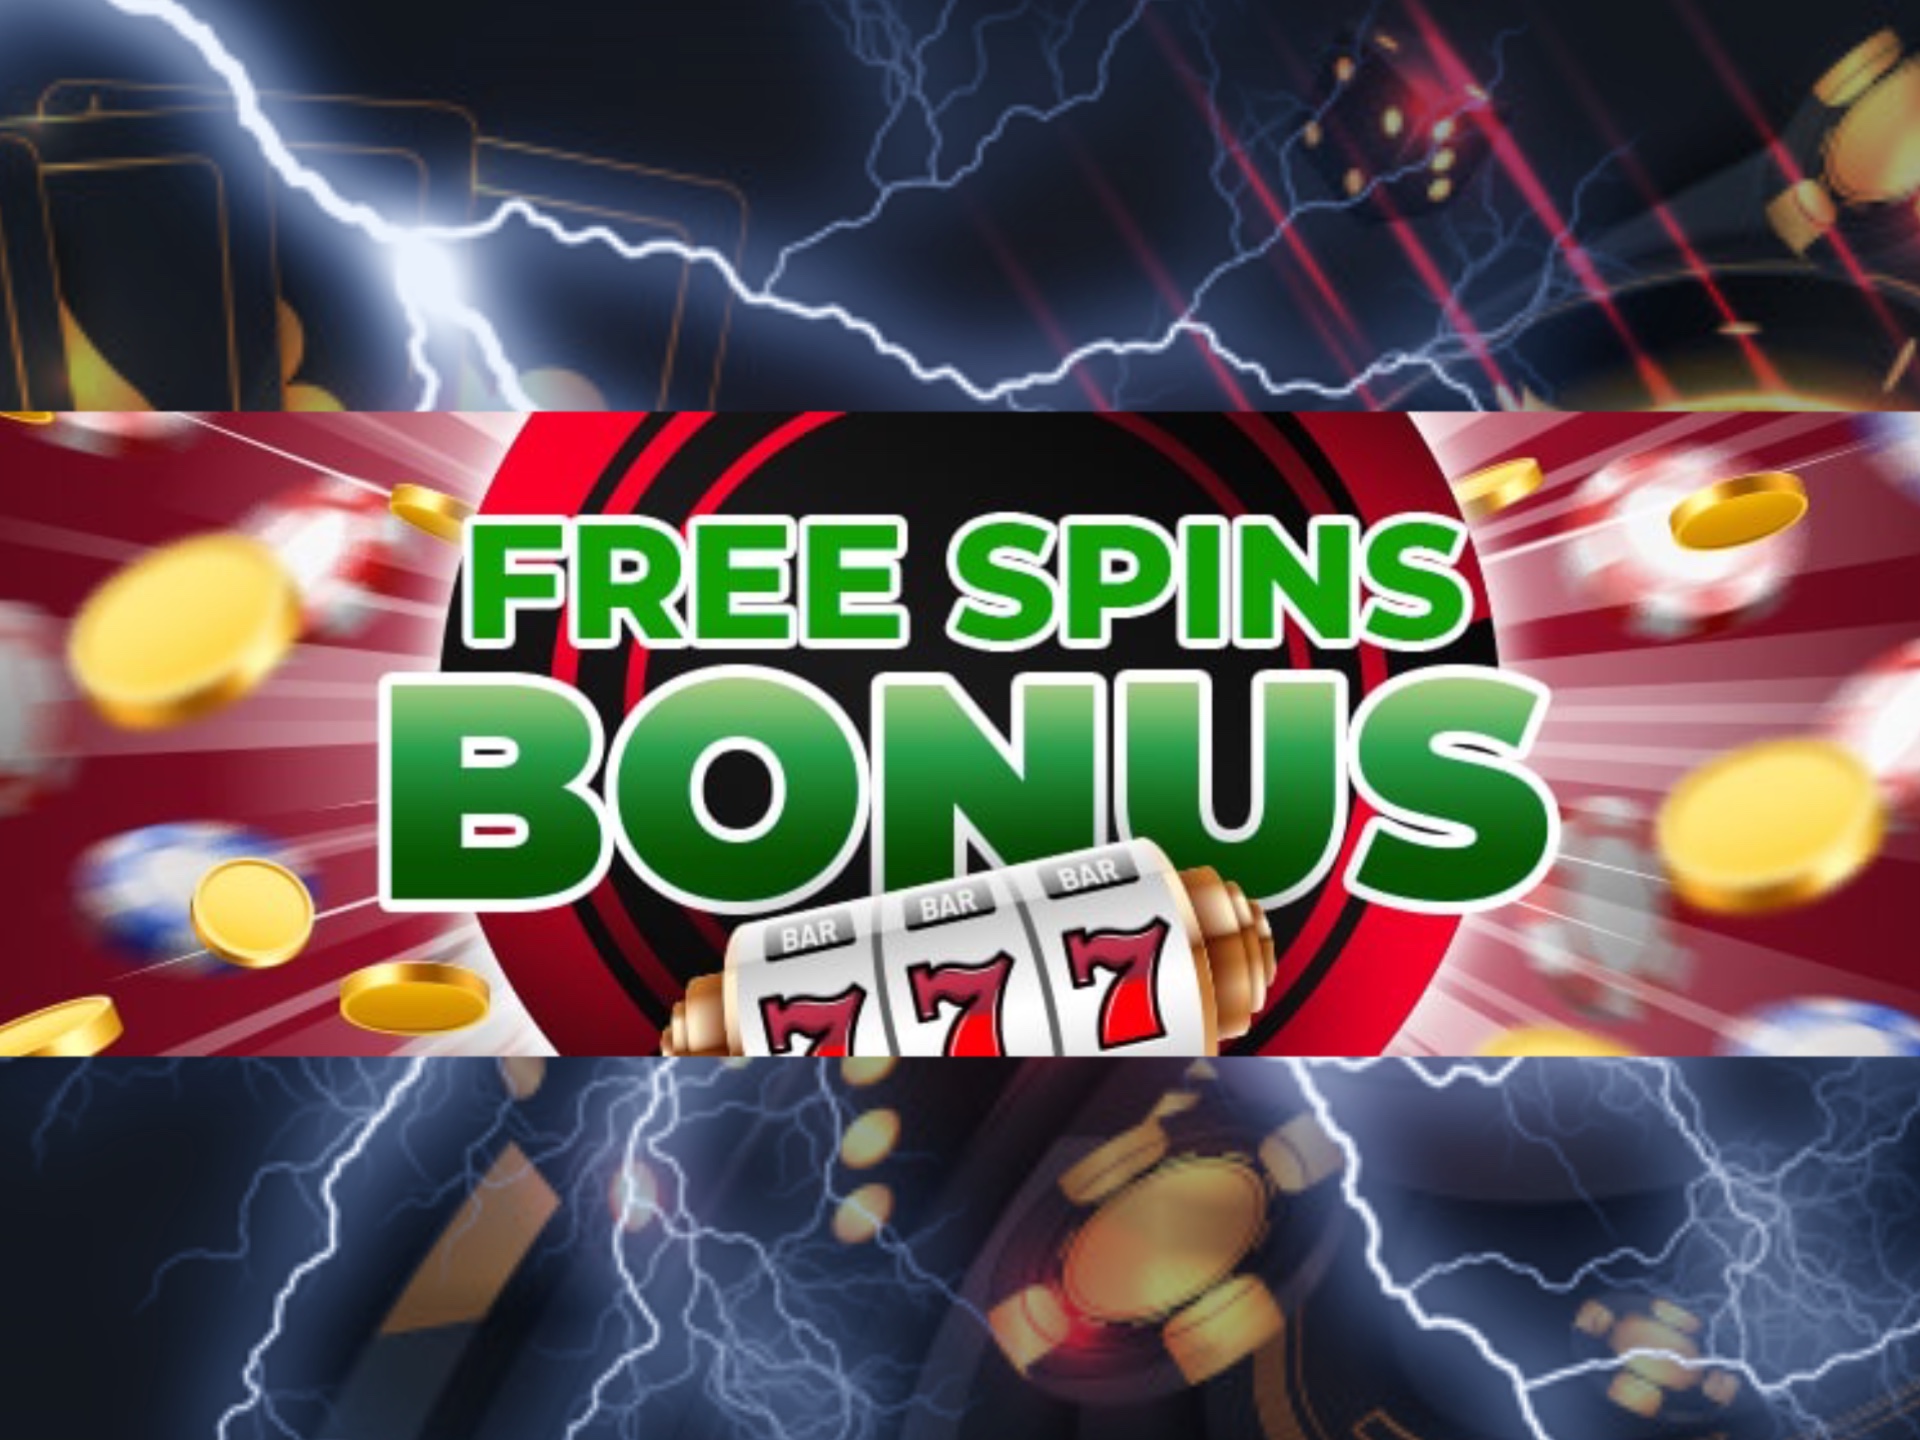 Free spins usually go in addition to other bonuses and give you advantage in some online casino slots.